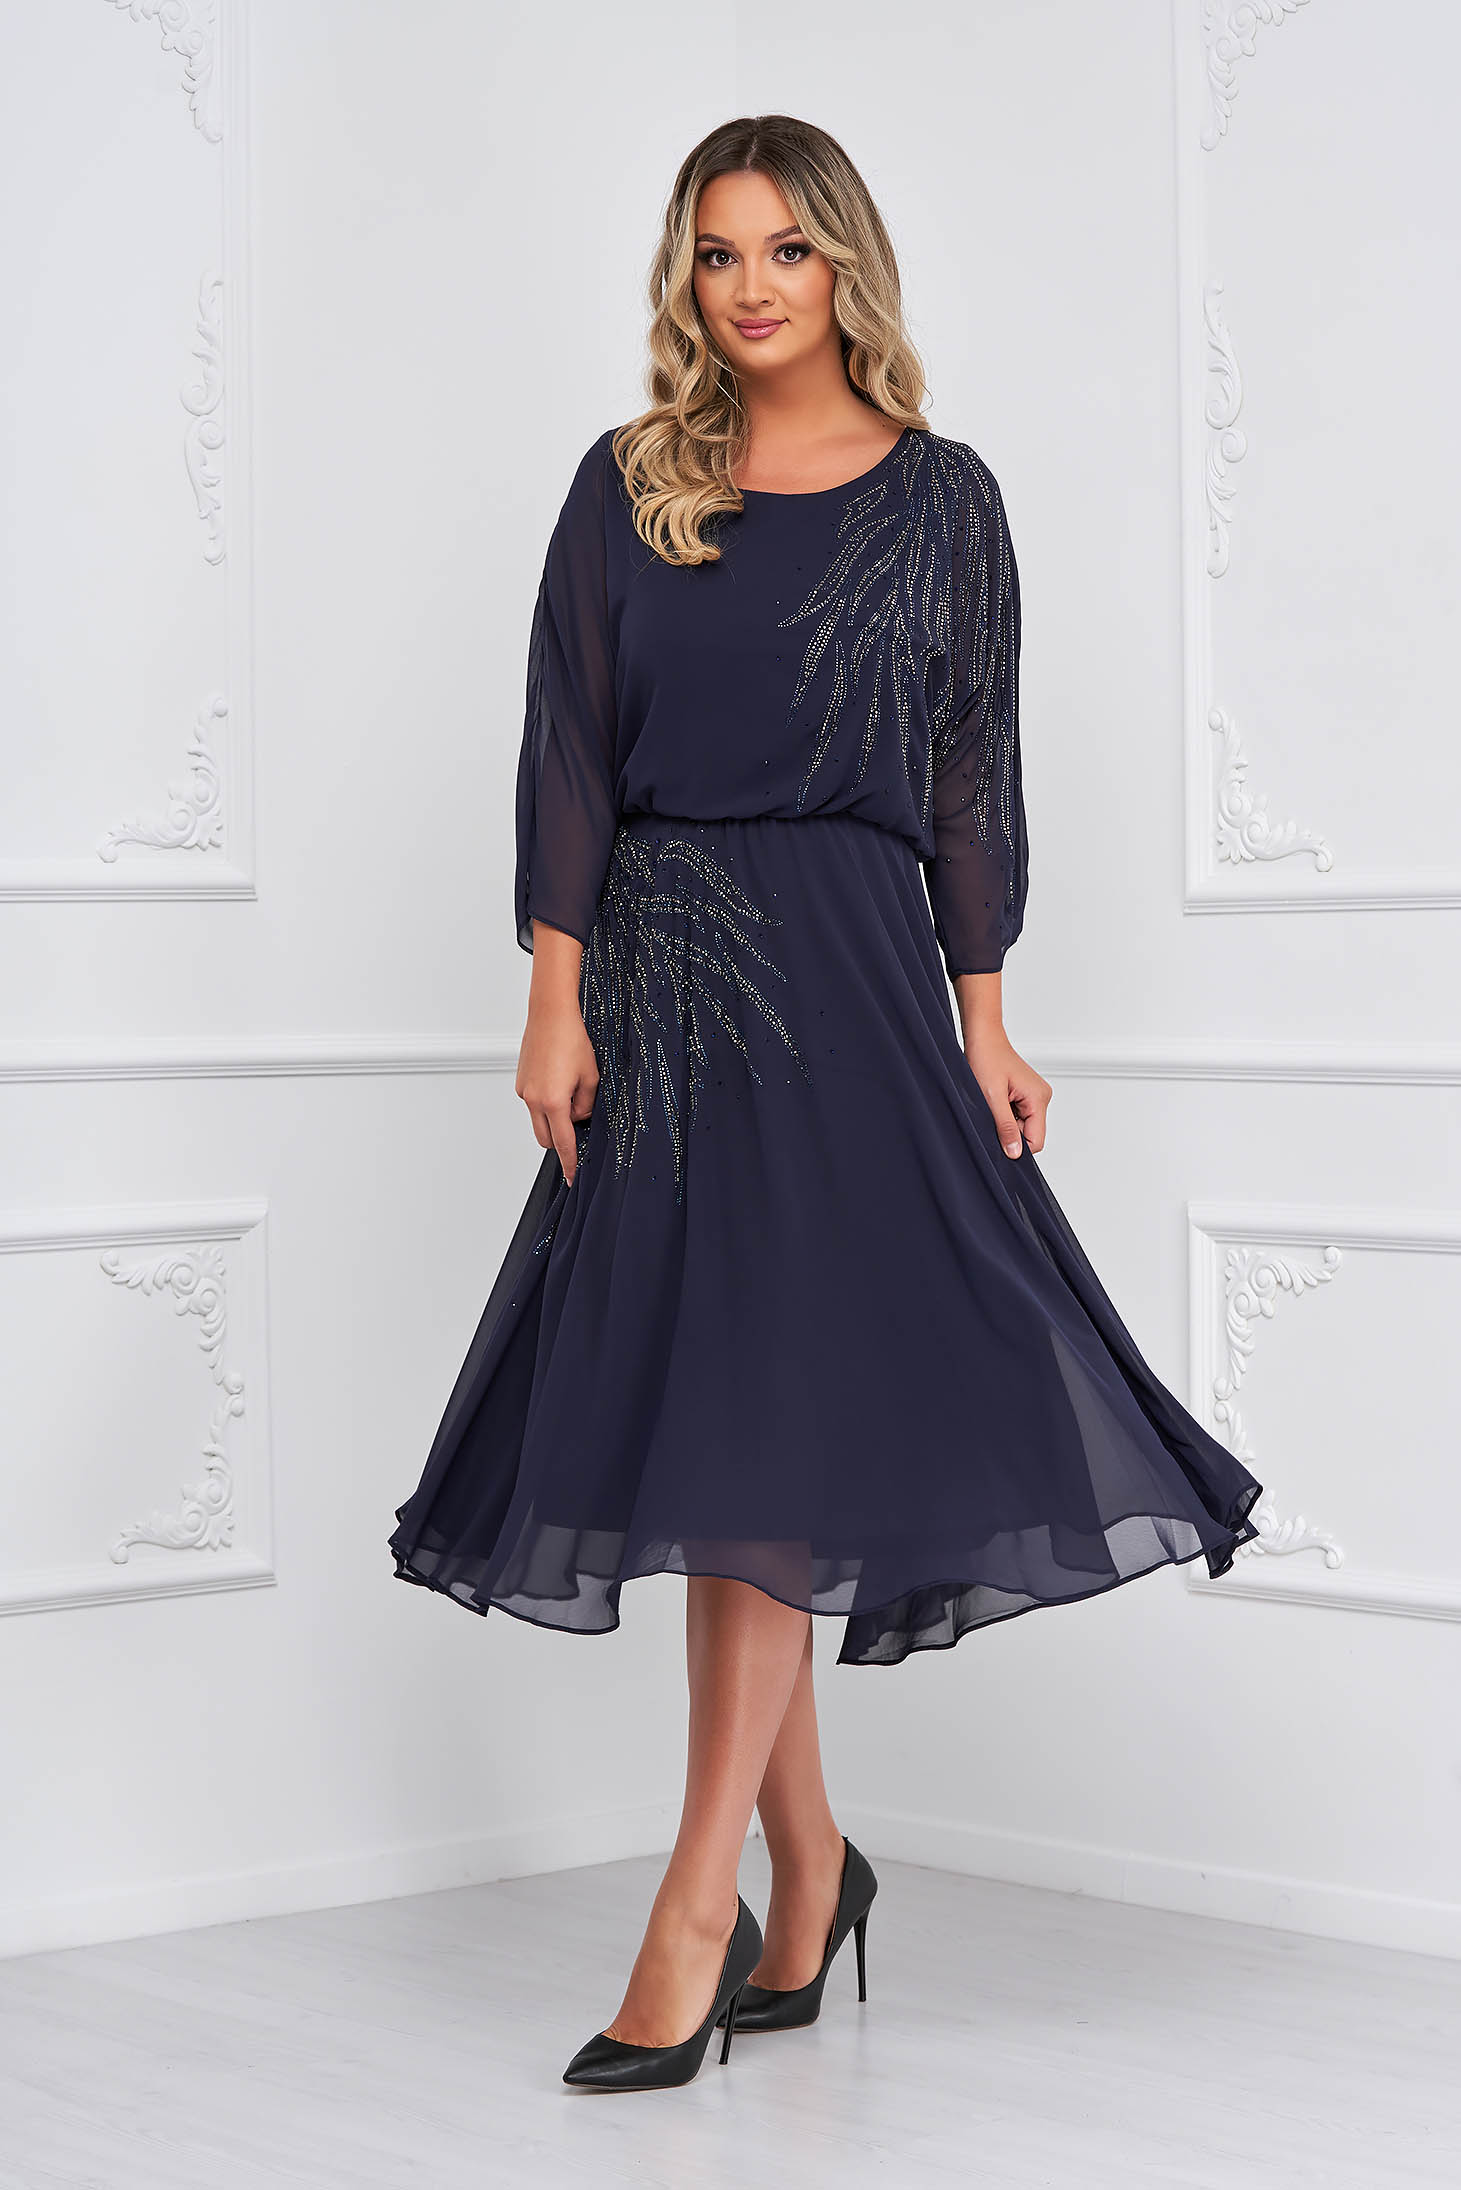 Darkblue dress from veil fabric cloche with elastic waist midi with crystal embellished details